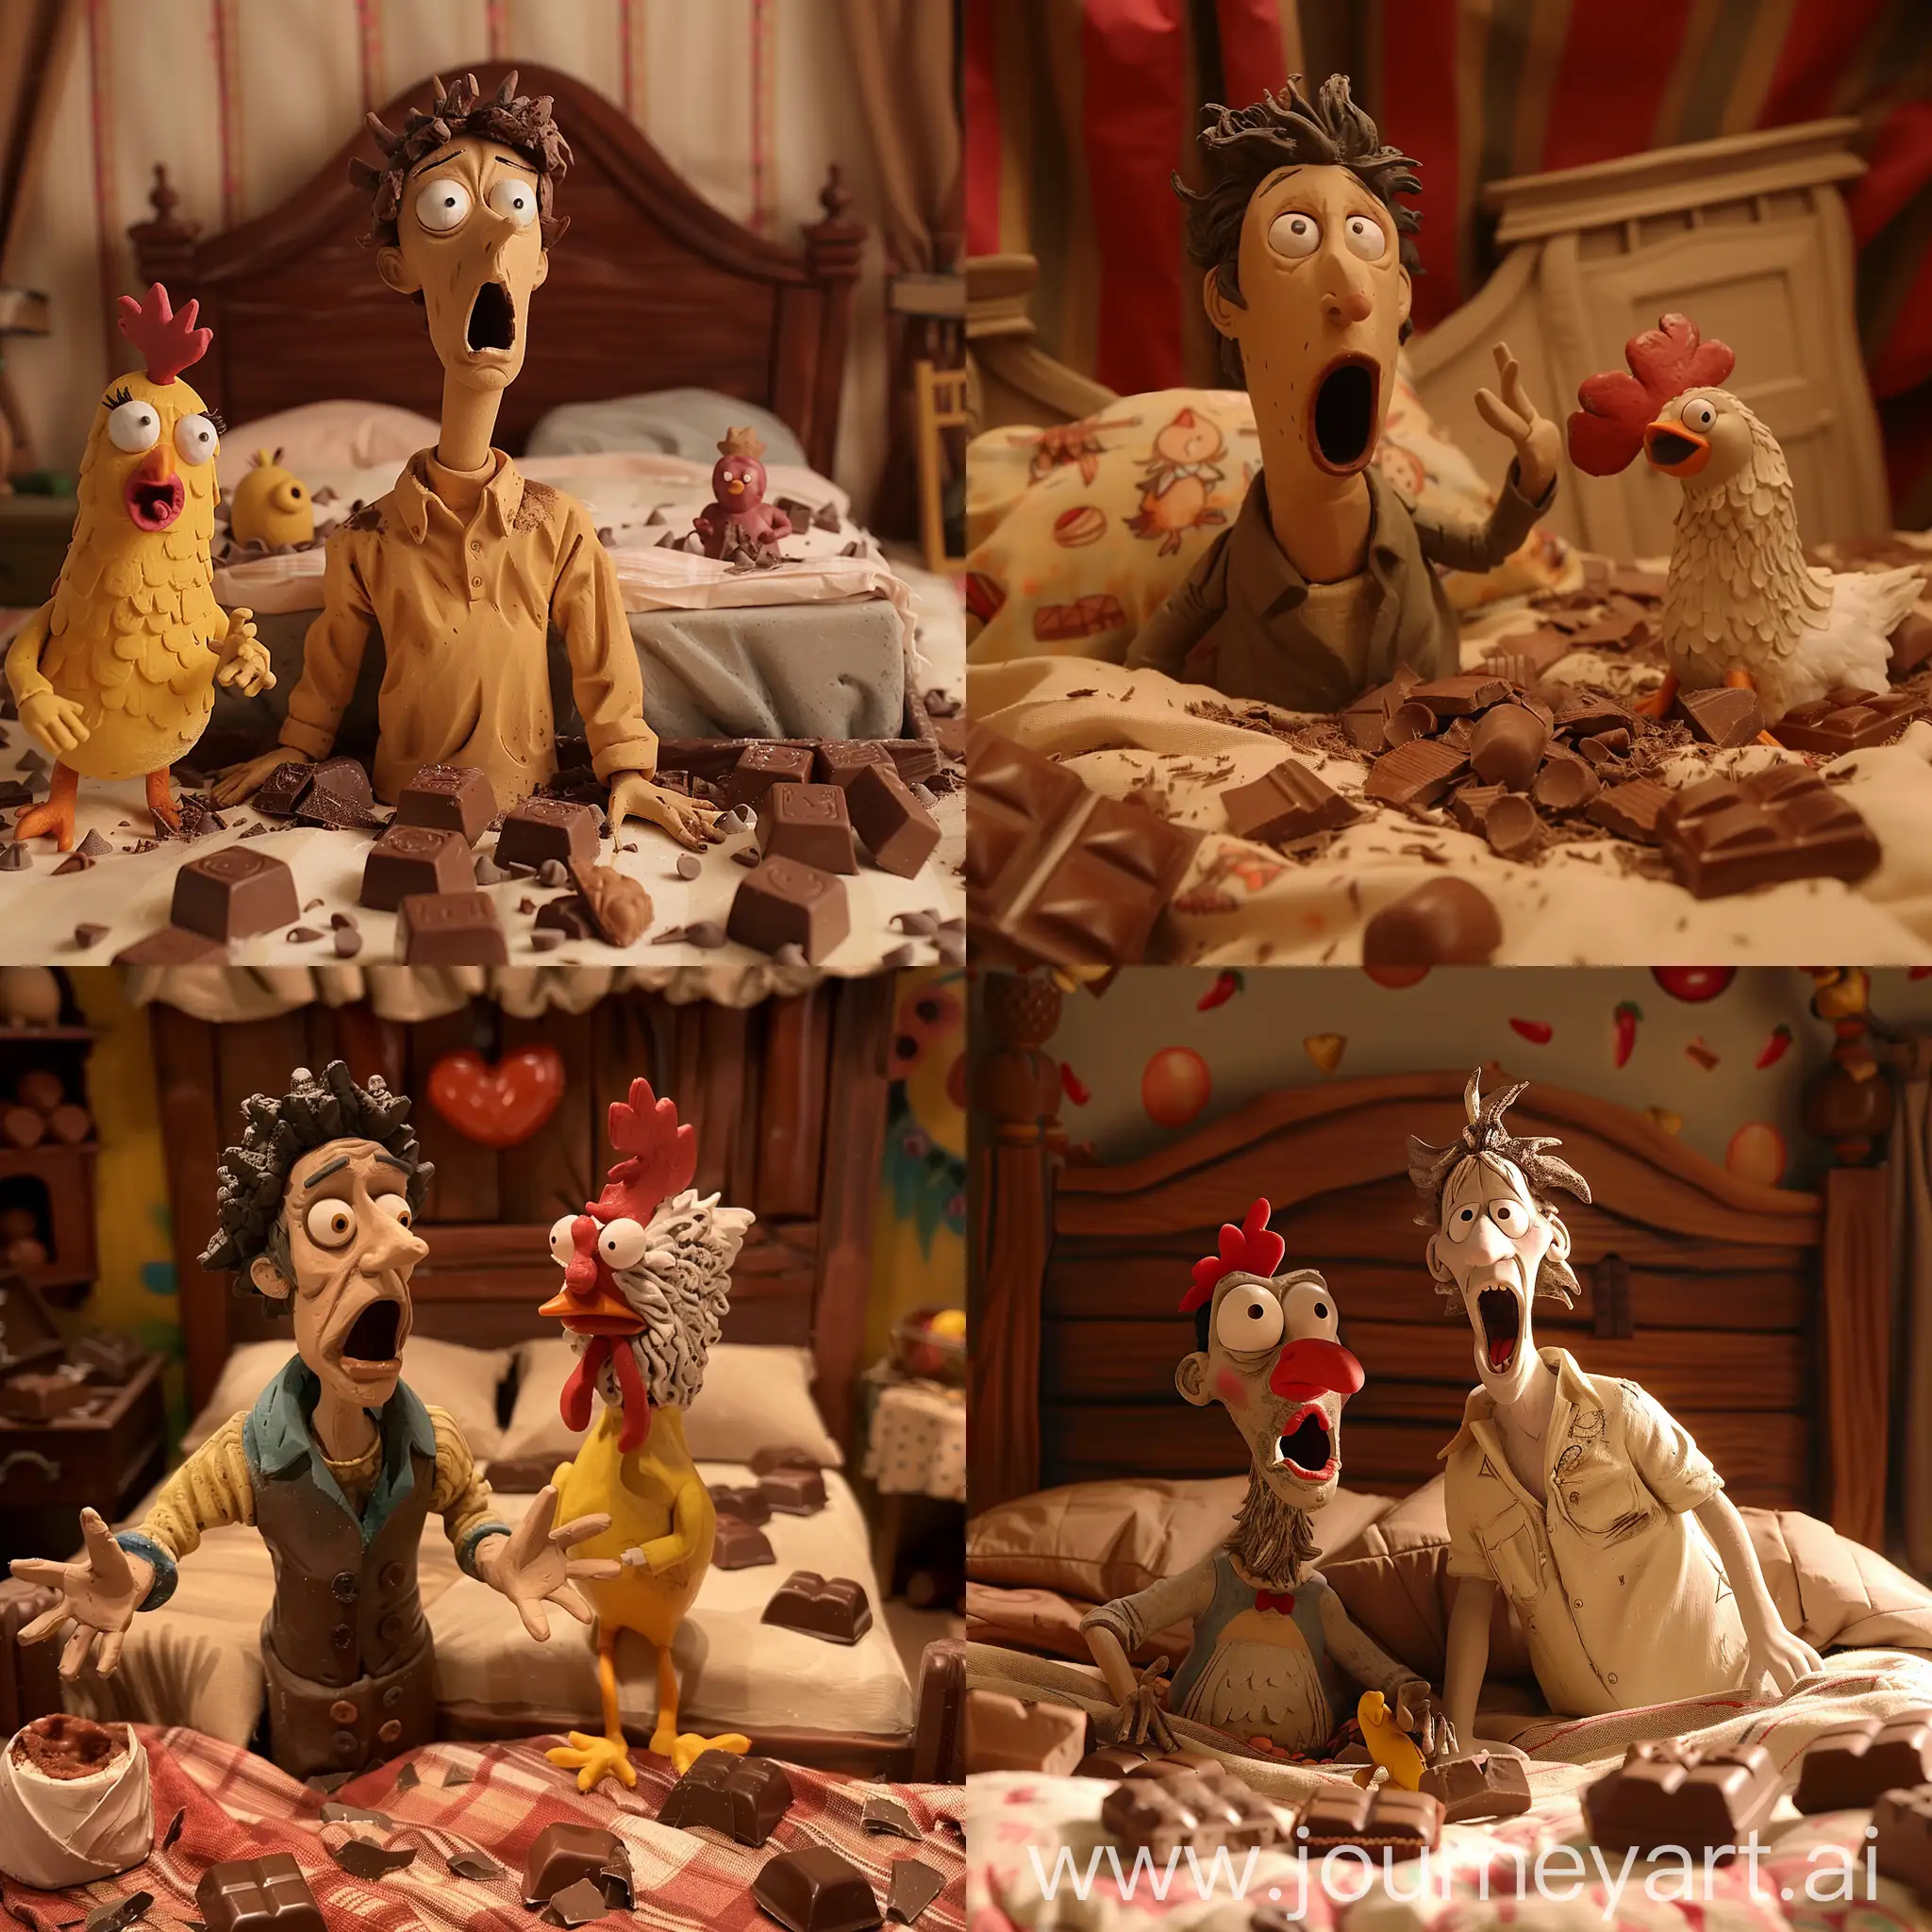 Mr. Tumnus looking shocked, with a Chicken Run character on his bed looking in love, both in the bedroom surrounded by chocolates, in claymation